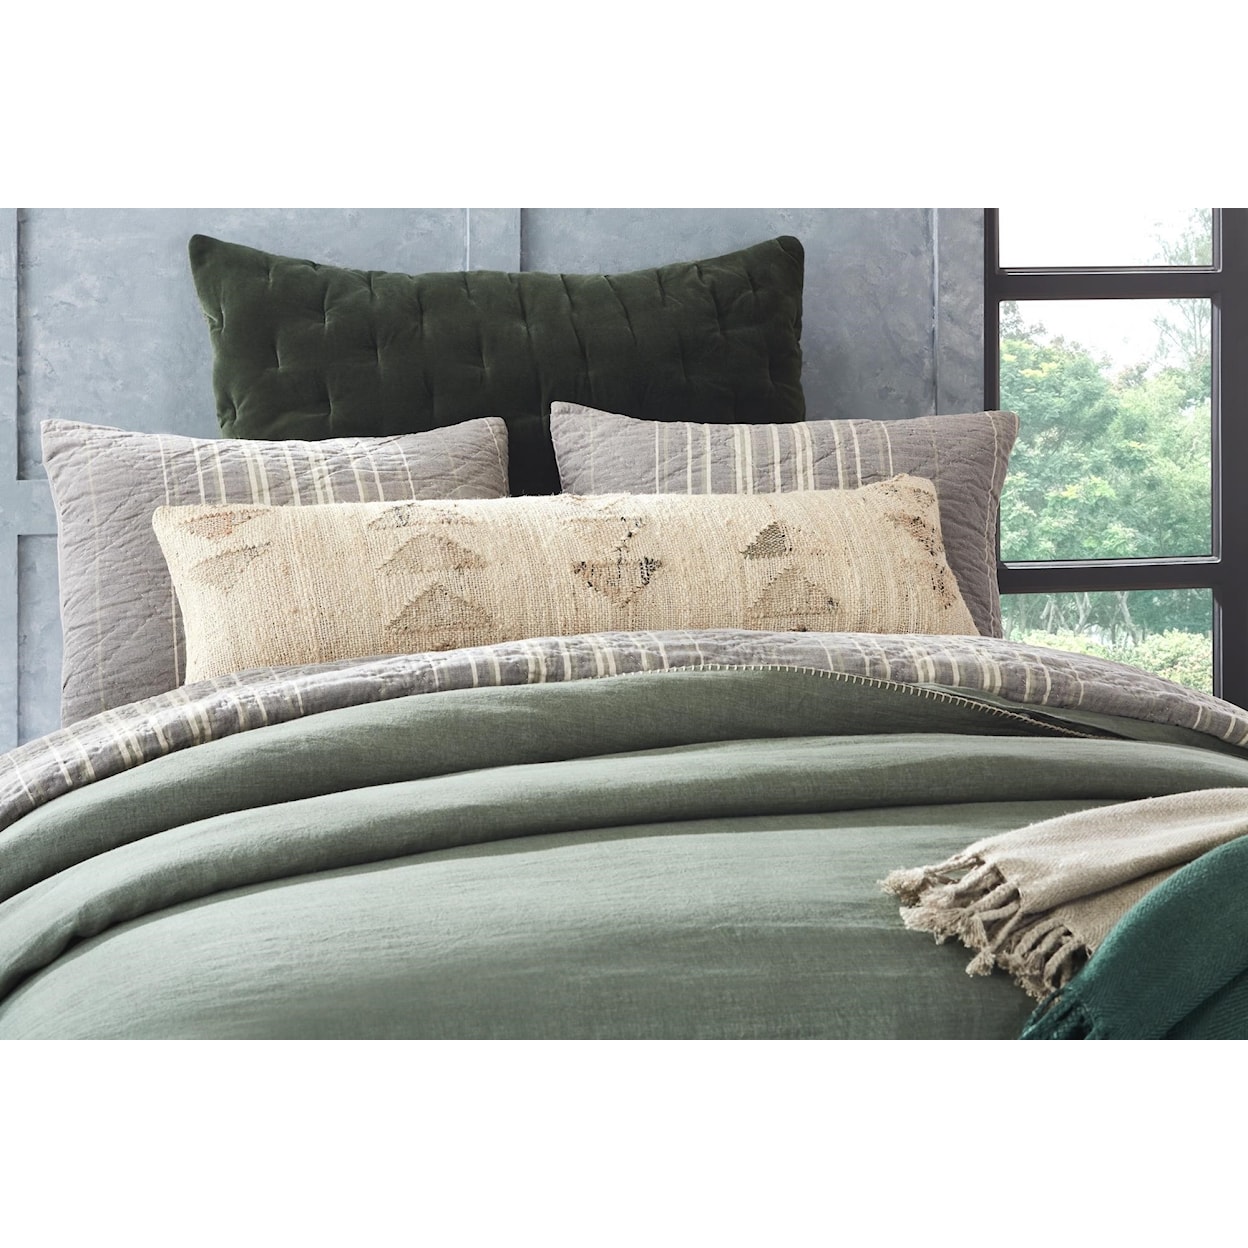 Amity Home Bryce Bryce Duvet Cover, Kale, Queen